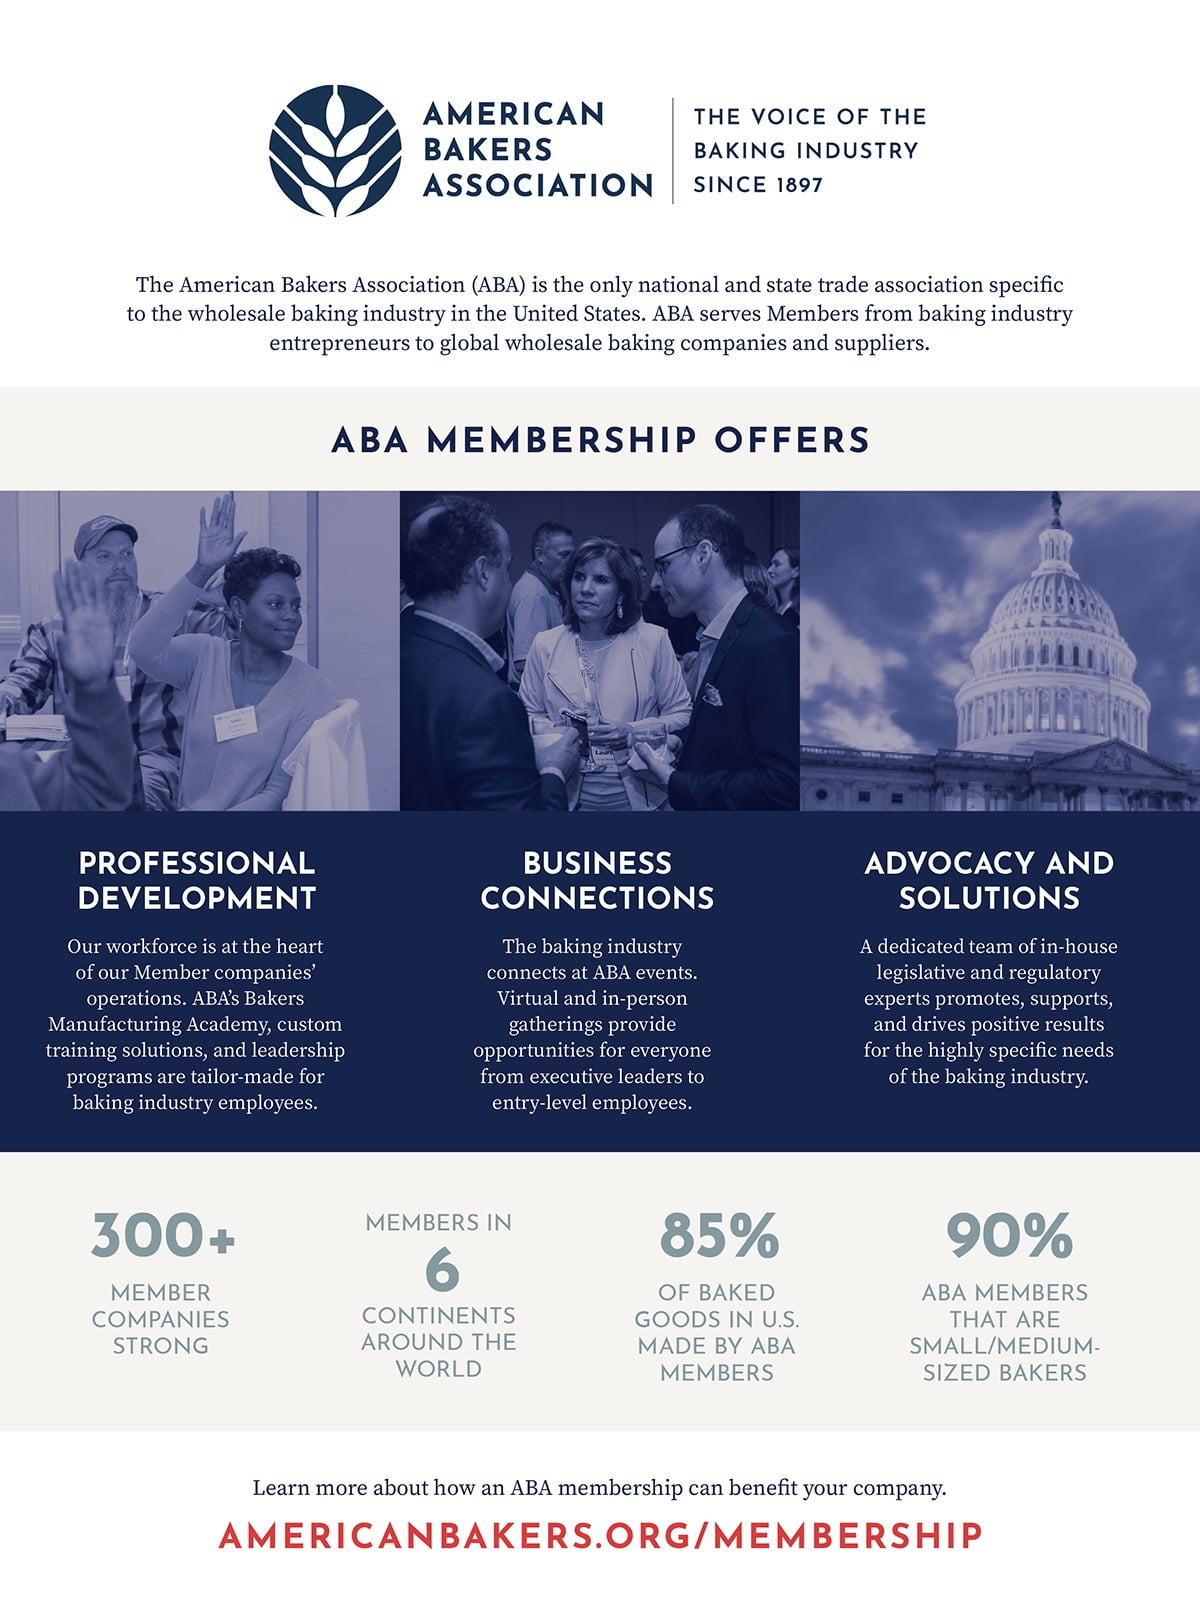 Full page ad, Logo, Text, Photo of women with name tag, Photo of capitol building